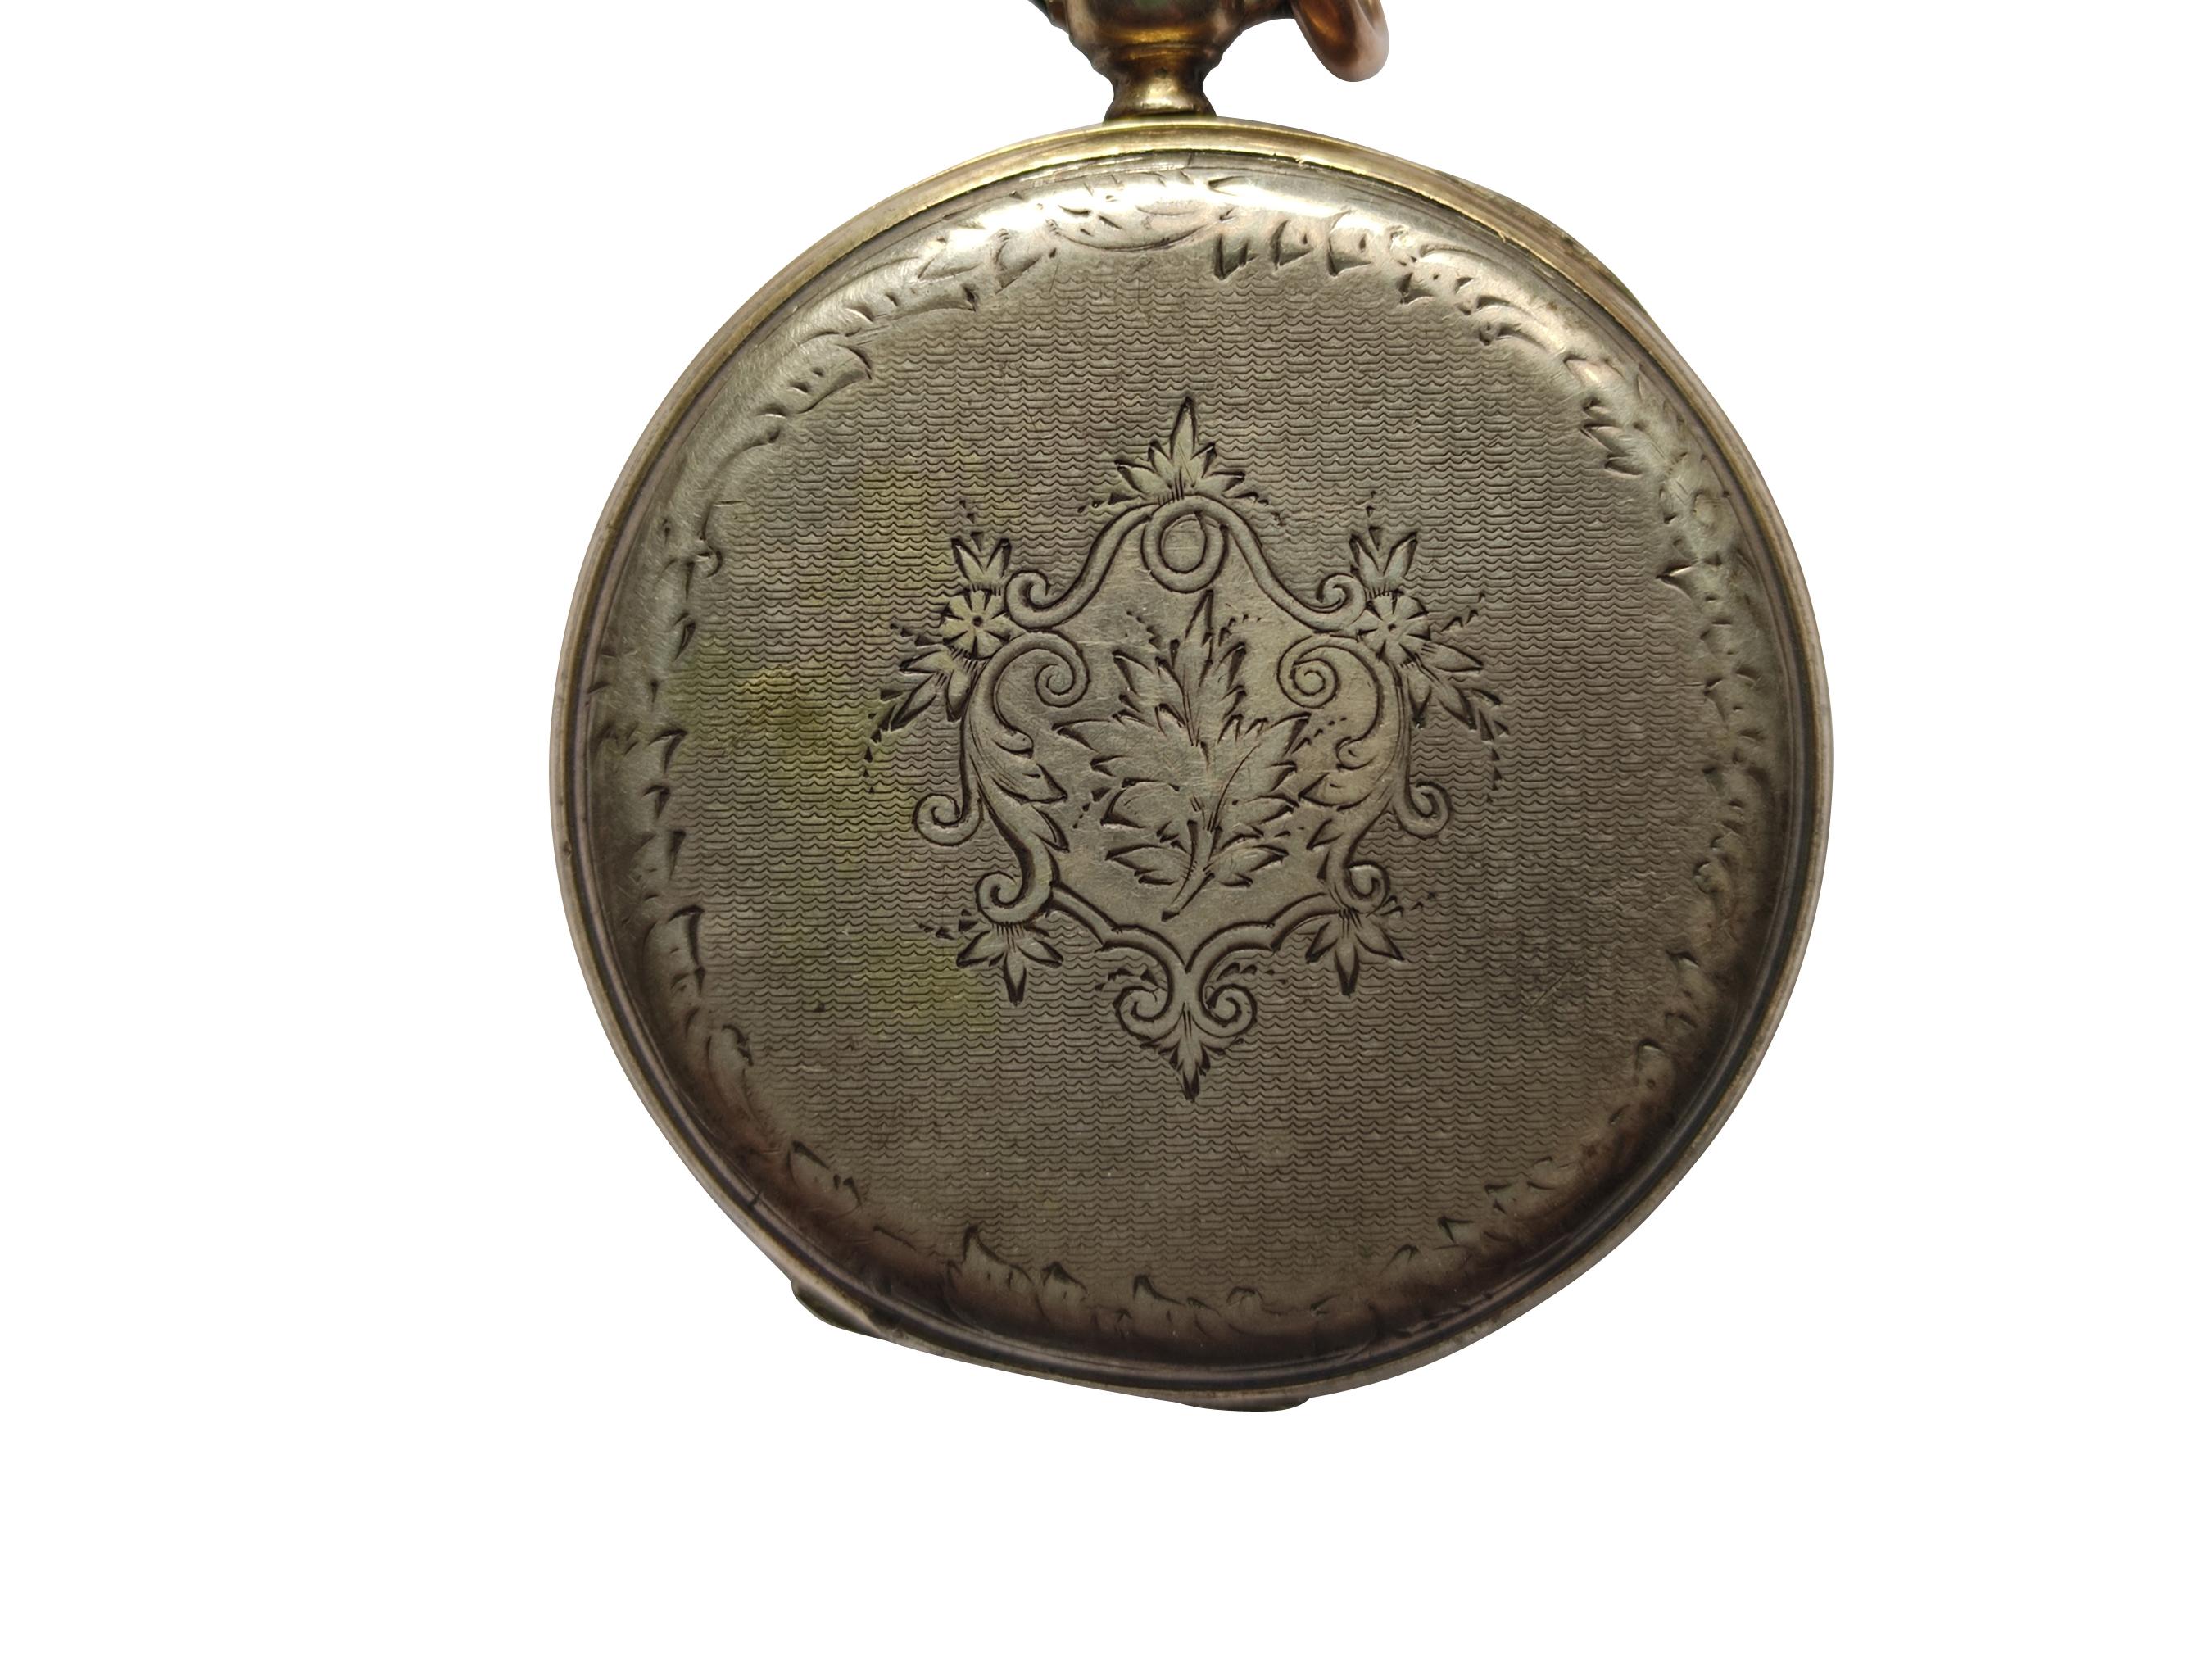 Rare Antique Pocket Key Watch French 1800s with Painted Enamel Dial For Sale 10